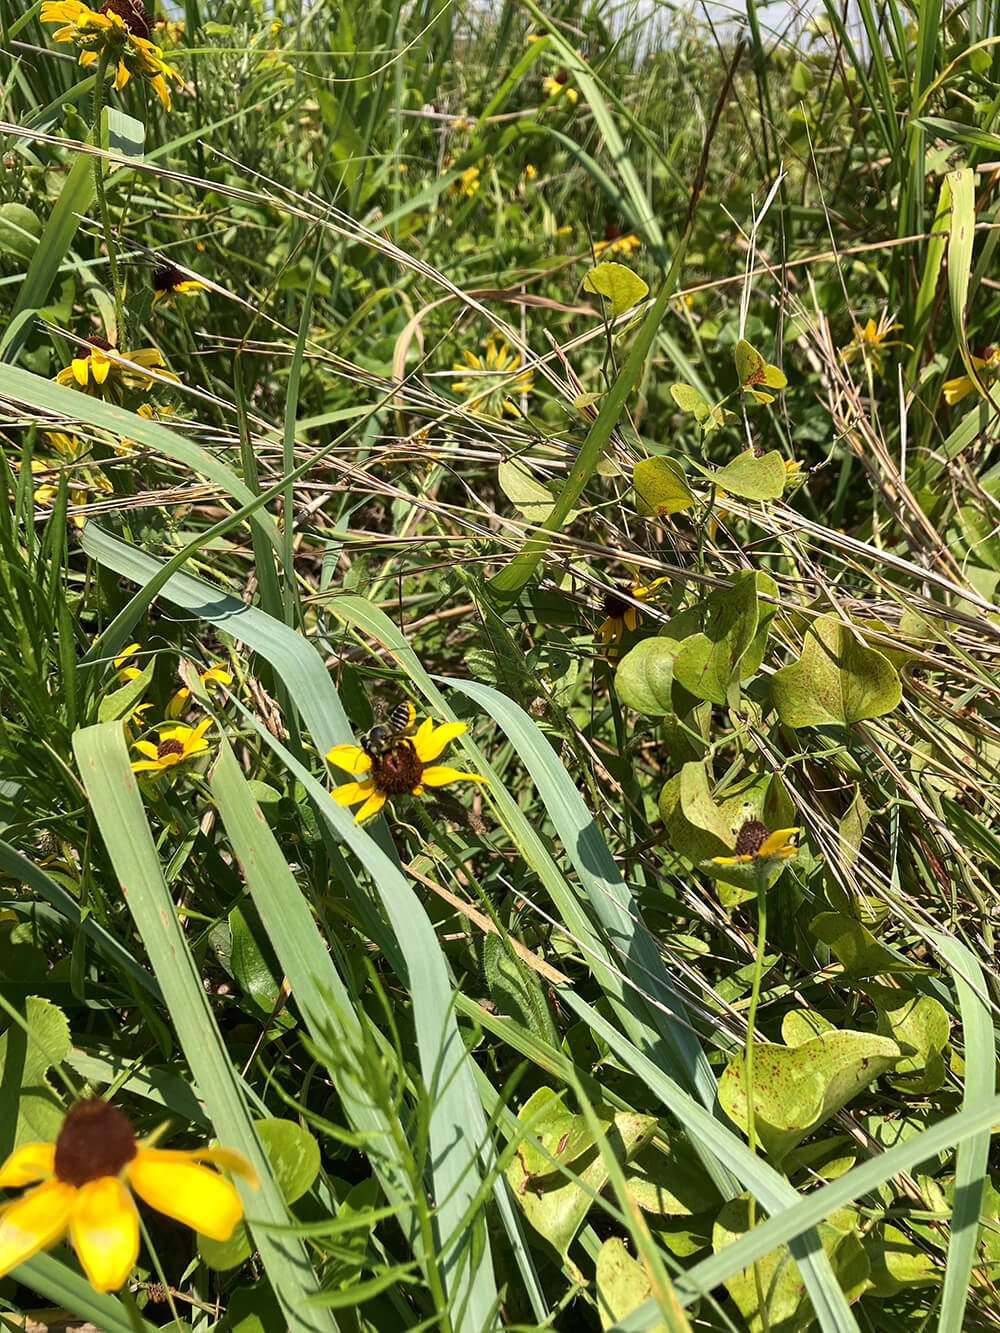 Pasture with diverse mix of plant life and insects